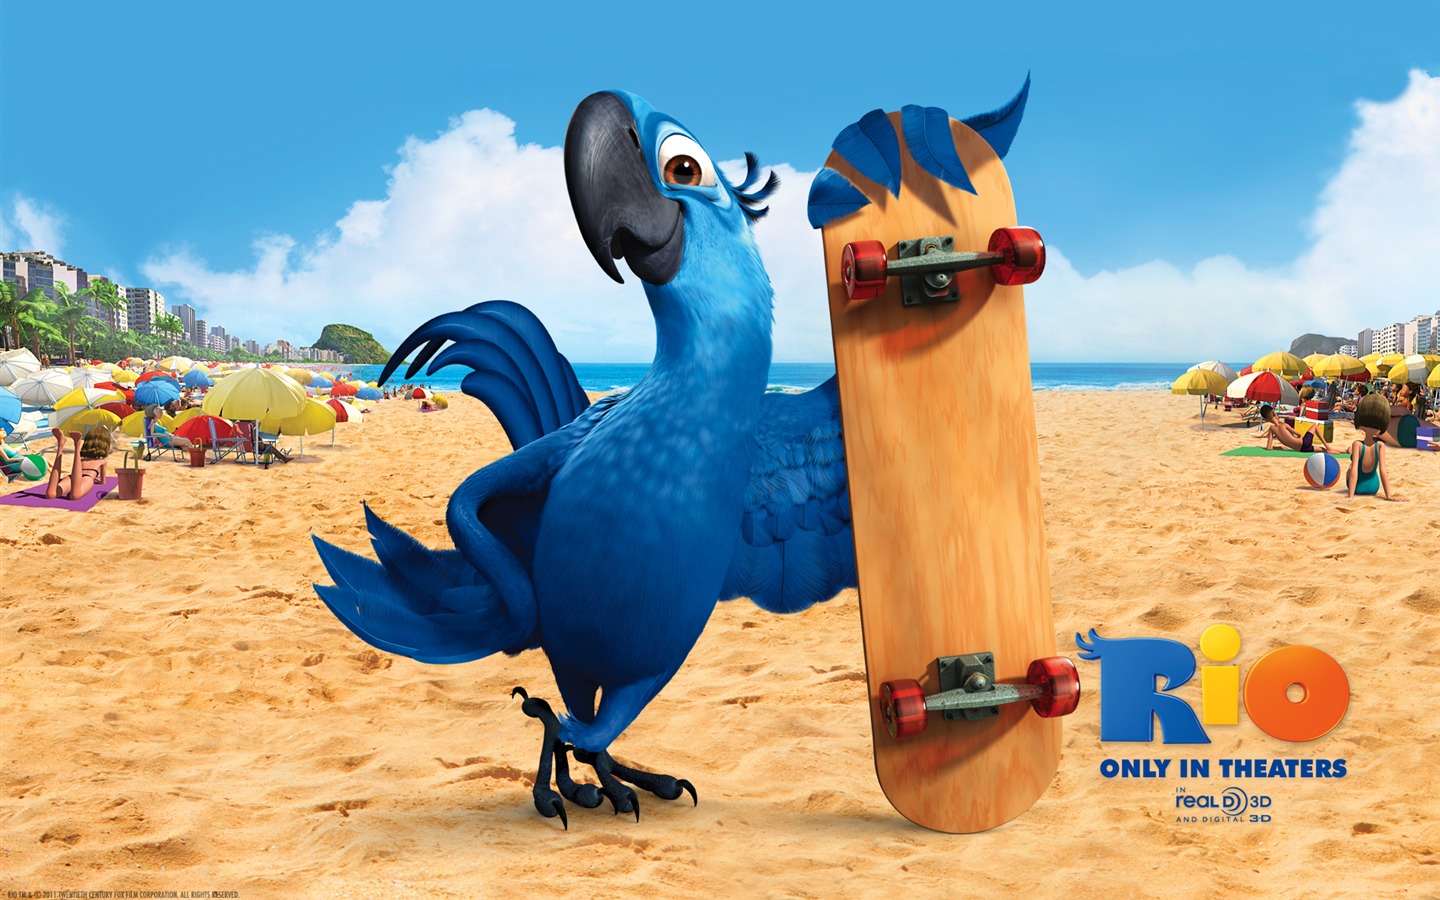 Rio 2011 wallpapers #3 - 1440x900